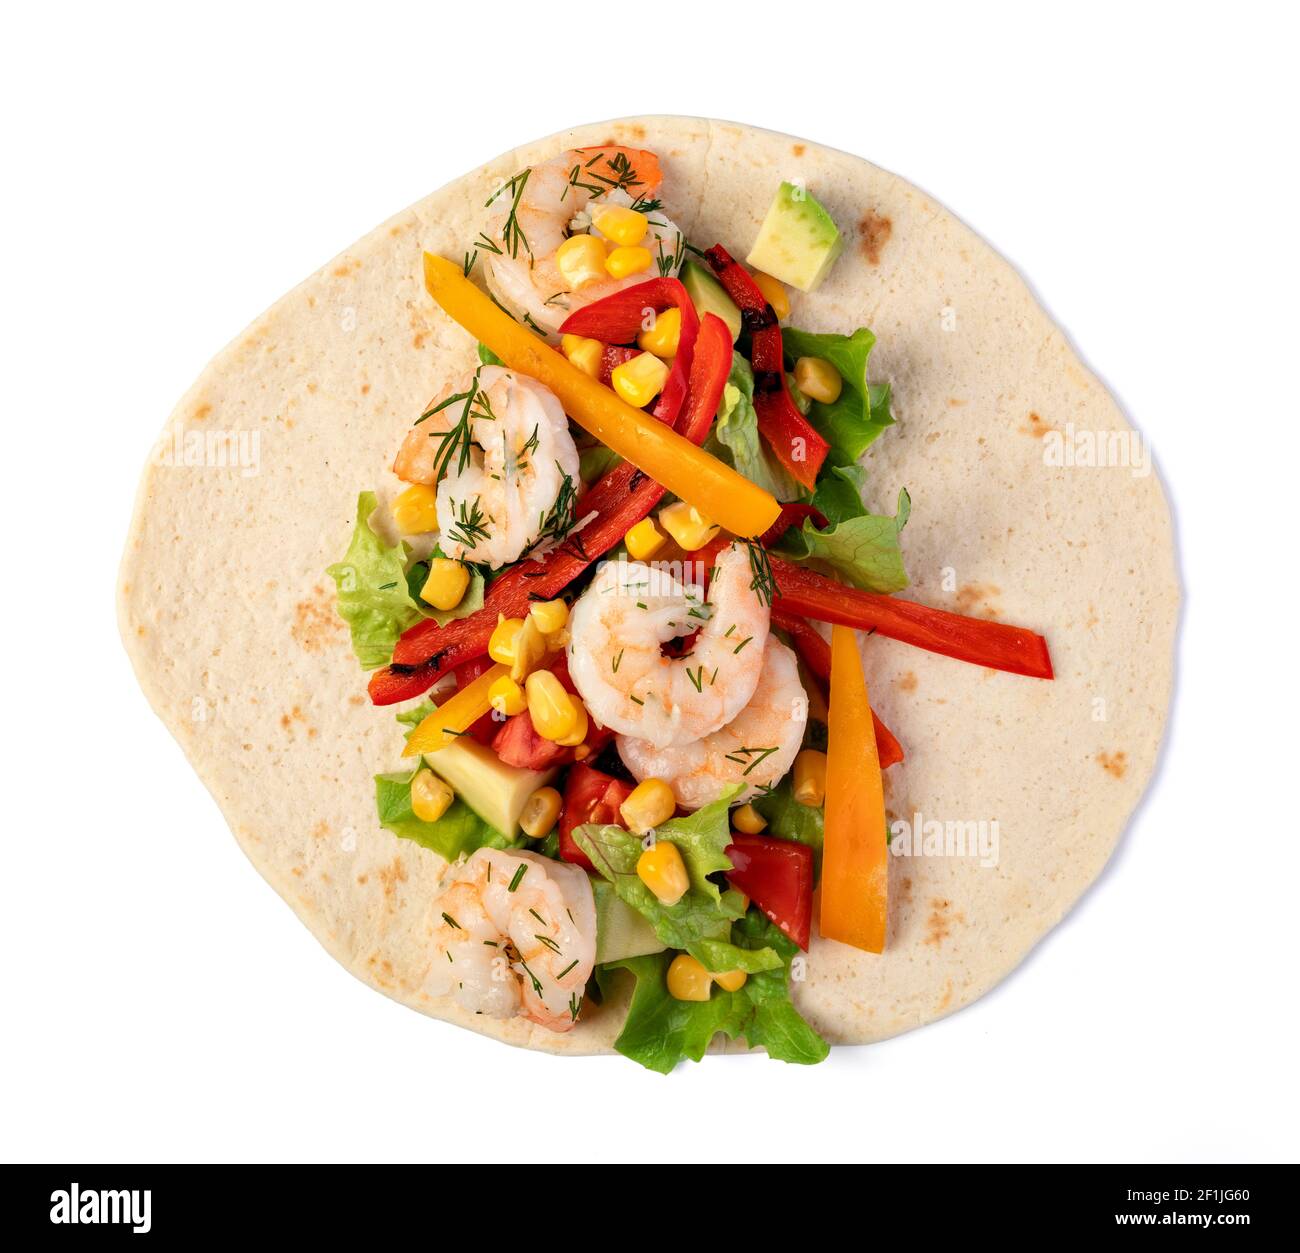 Burrito with vegetables and tortilla Stock Photo